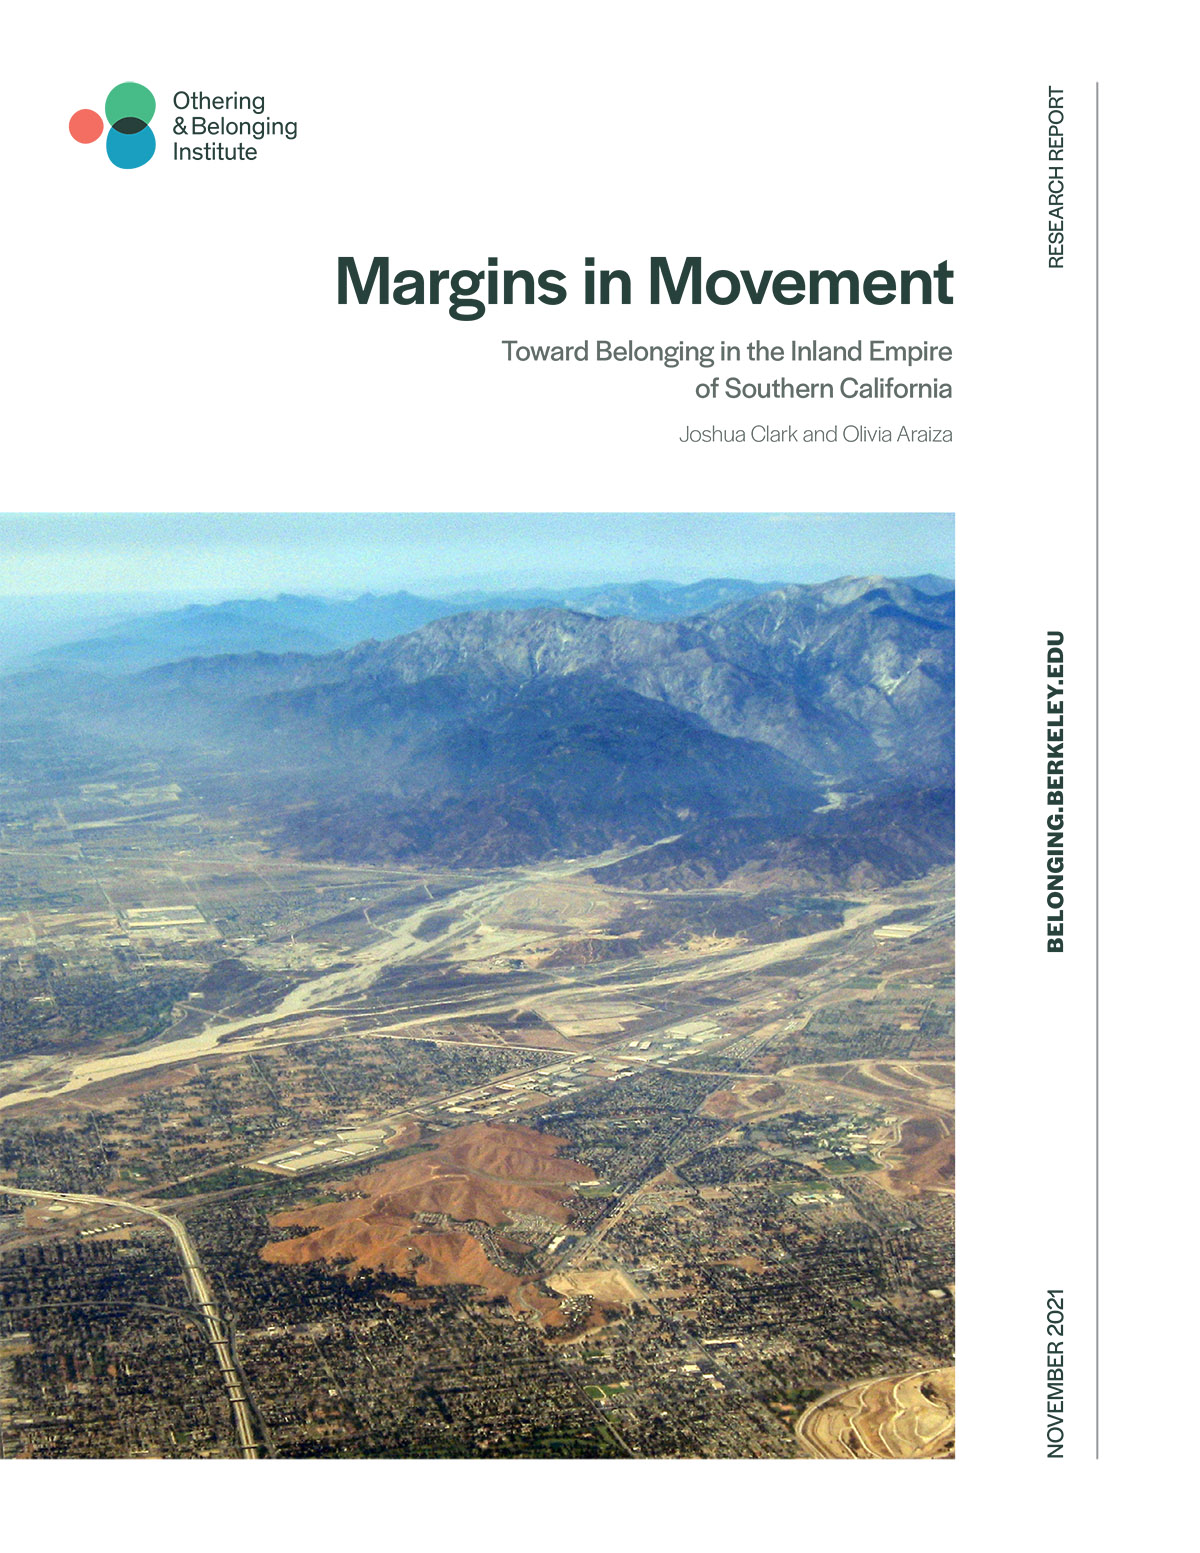 cover of the report featuring an aerial shot of the San Gabriel mountains